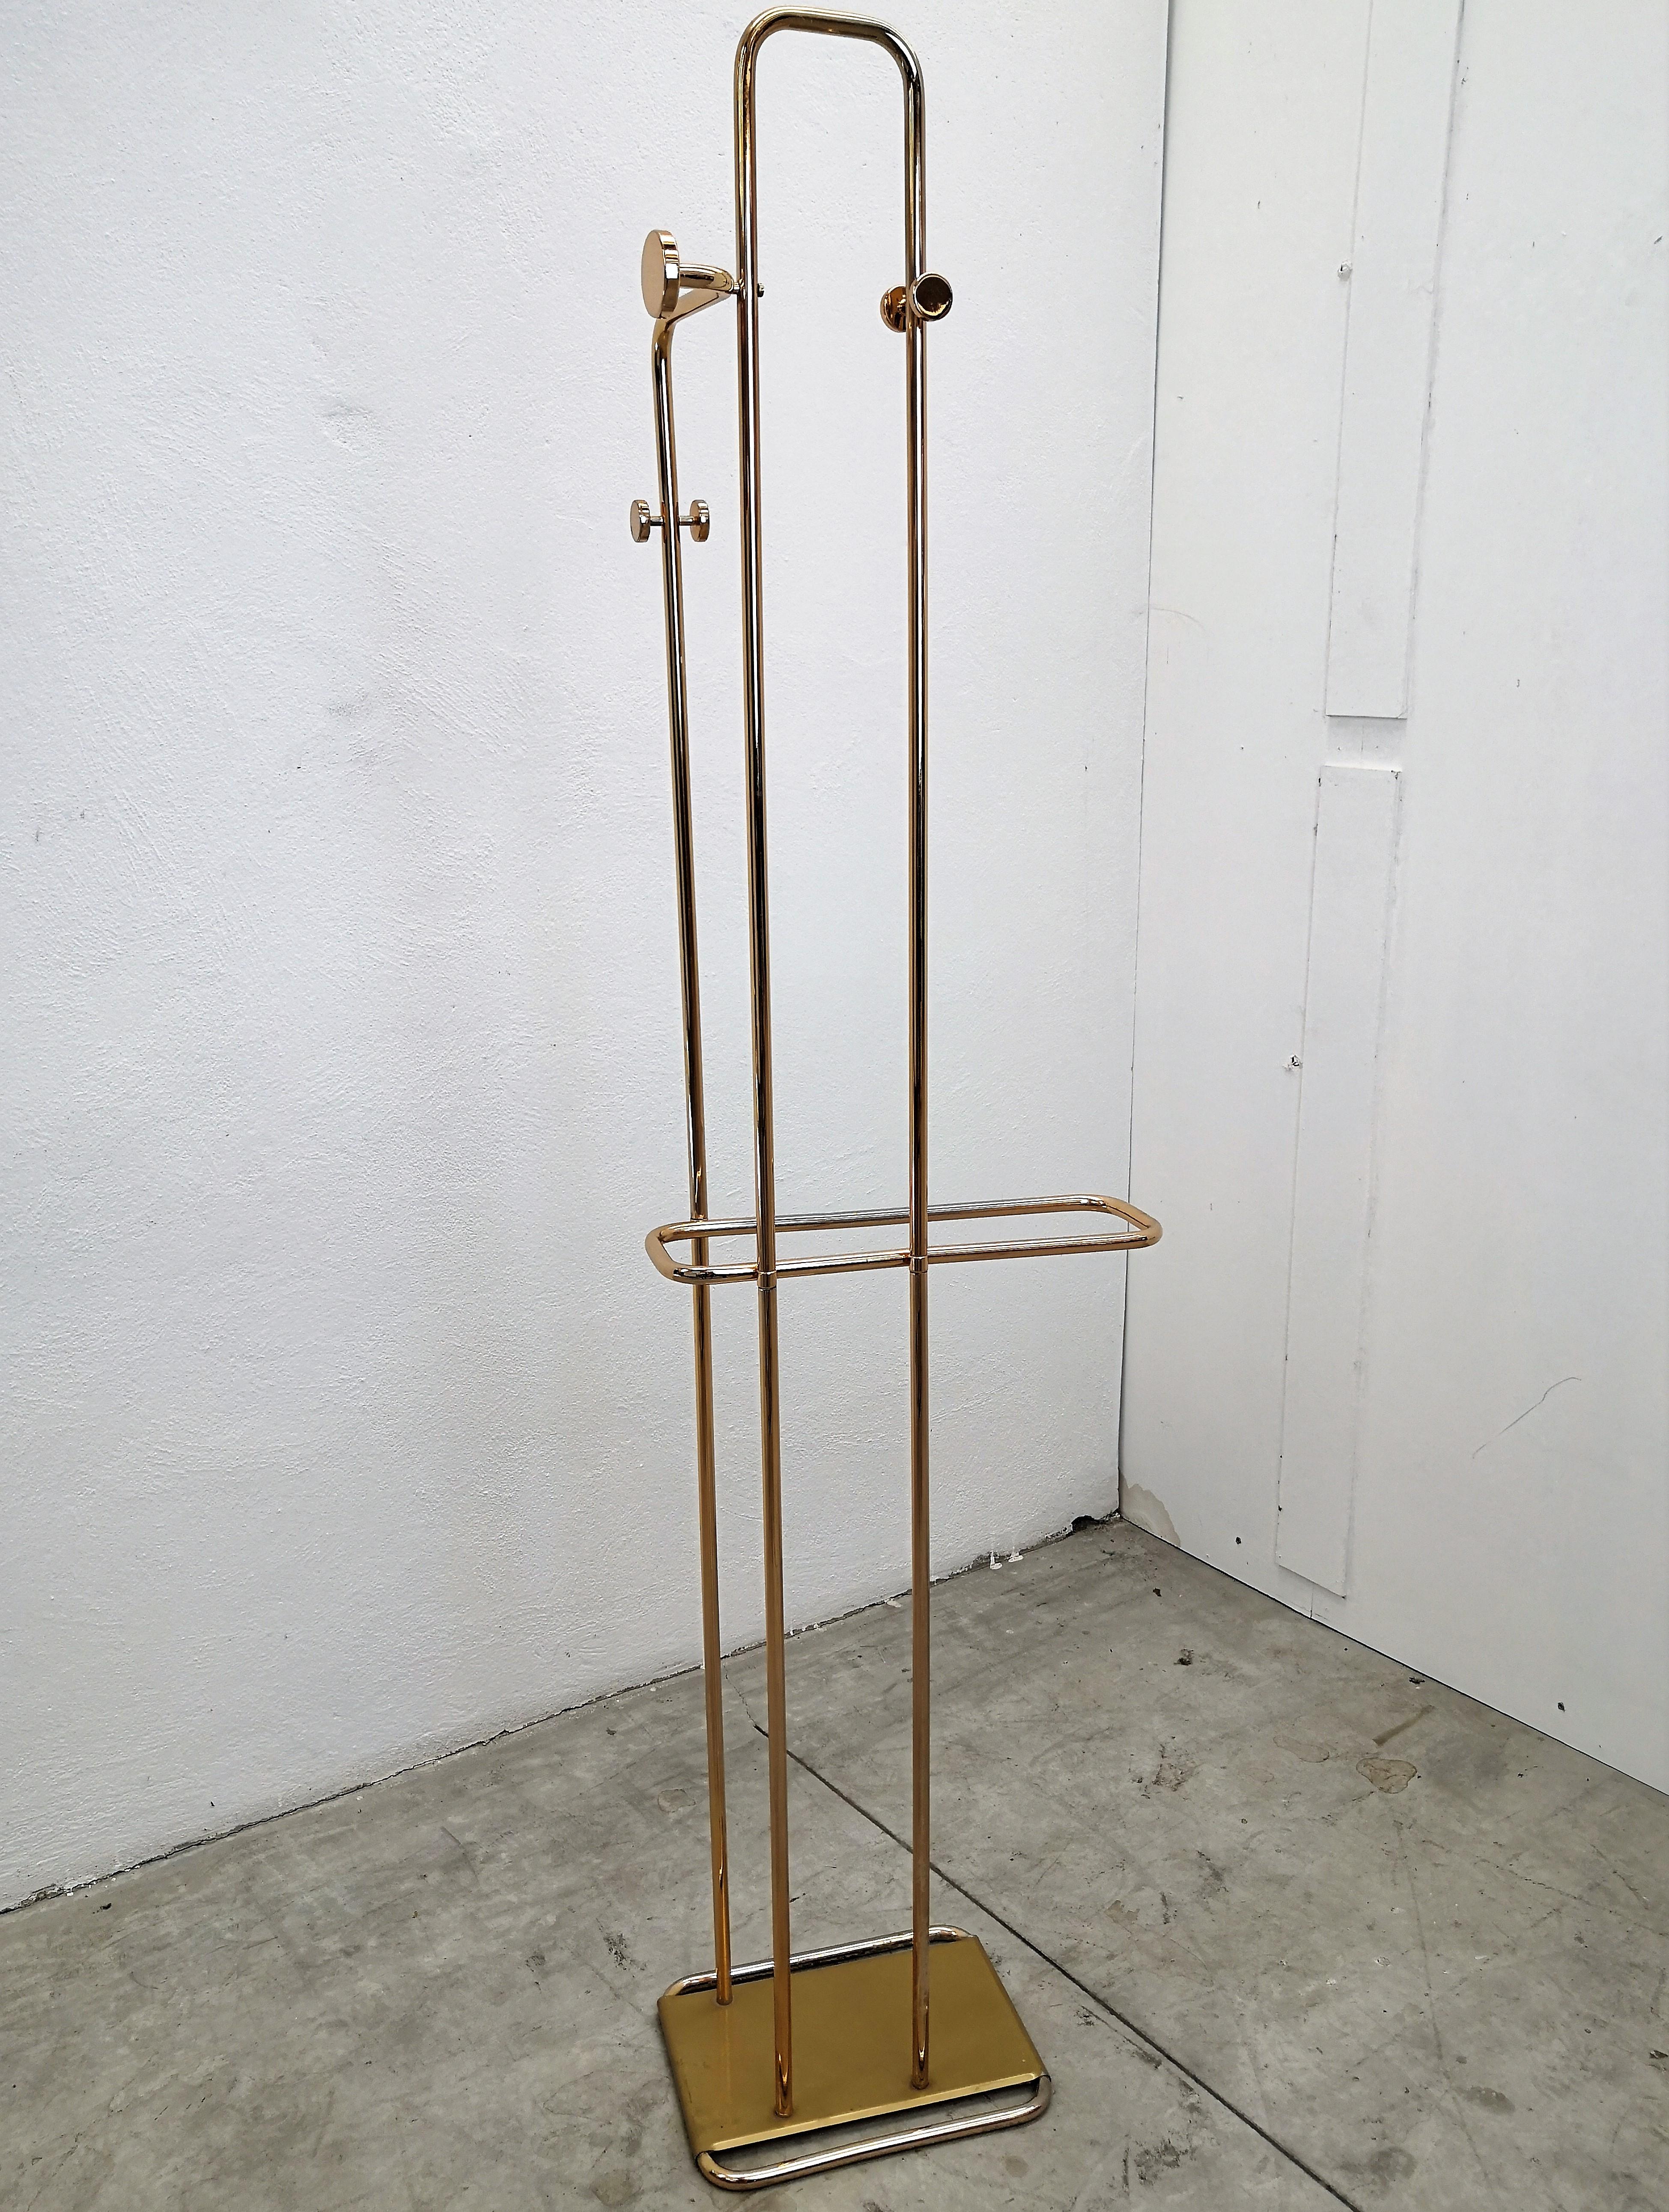 Beautiful and stylish vintage 1970s Italian brass dress boy valet stand. A great piece that perfectly adds to every home decor the typical glitz, glamour and gold of Hollywood Regency style, with a nod to Art Deco decadence and Mid-Century Modern